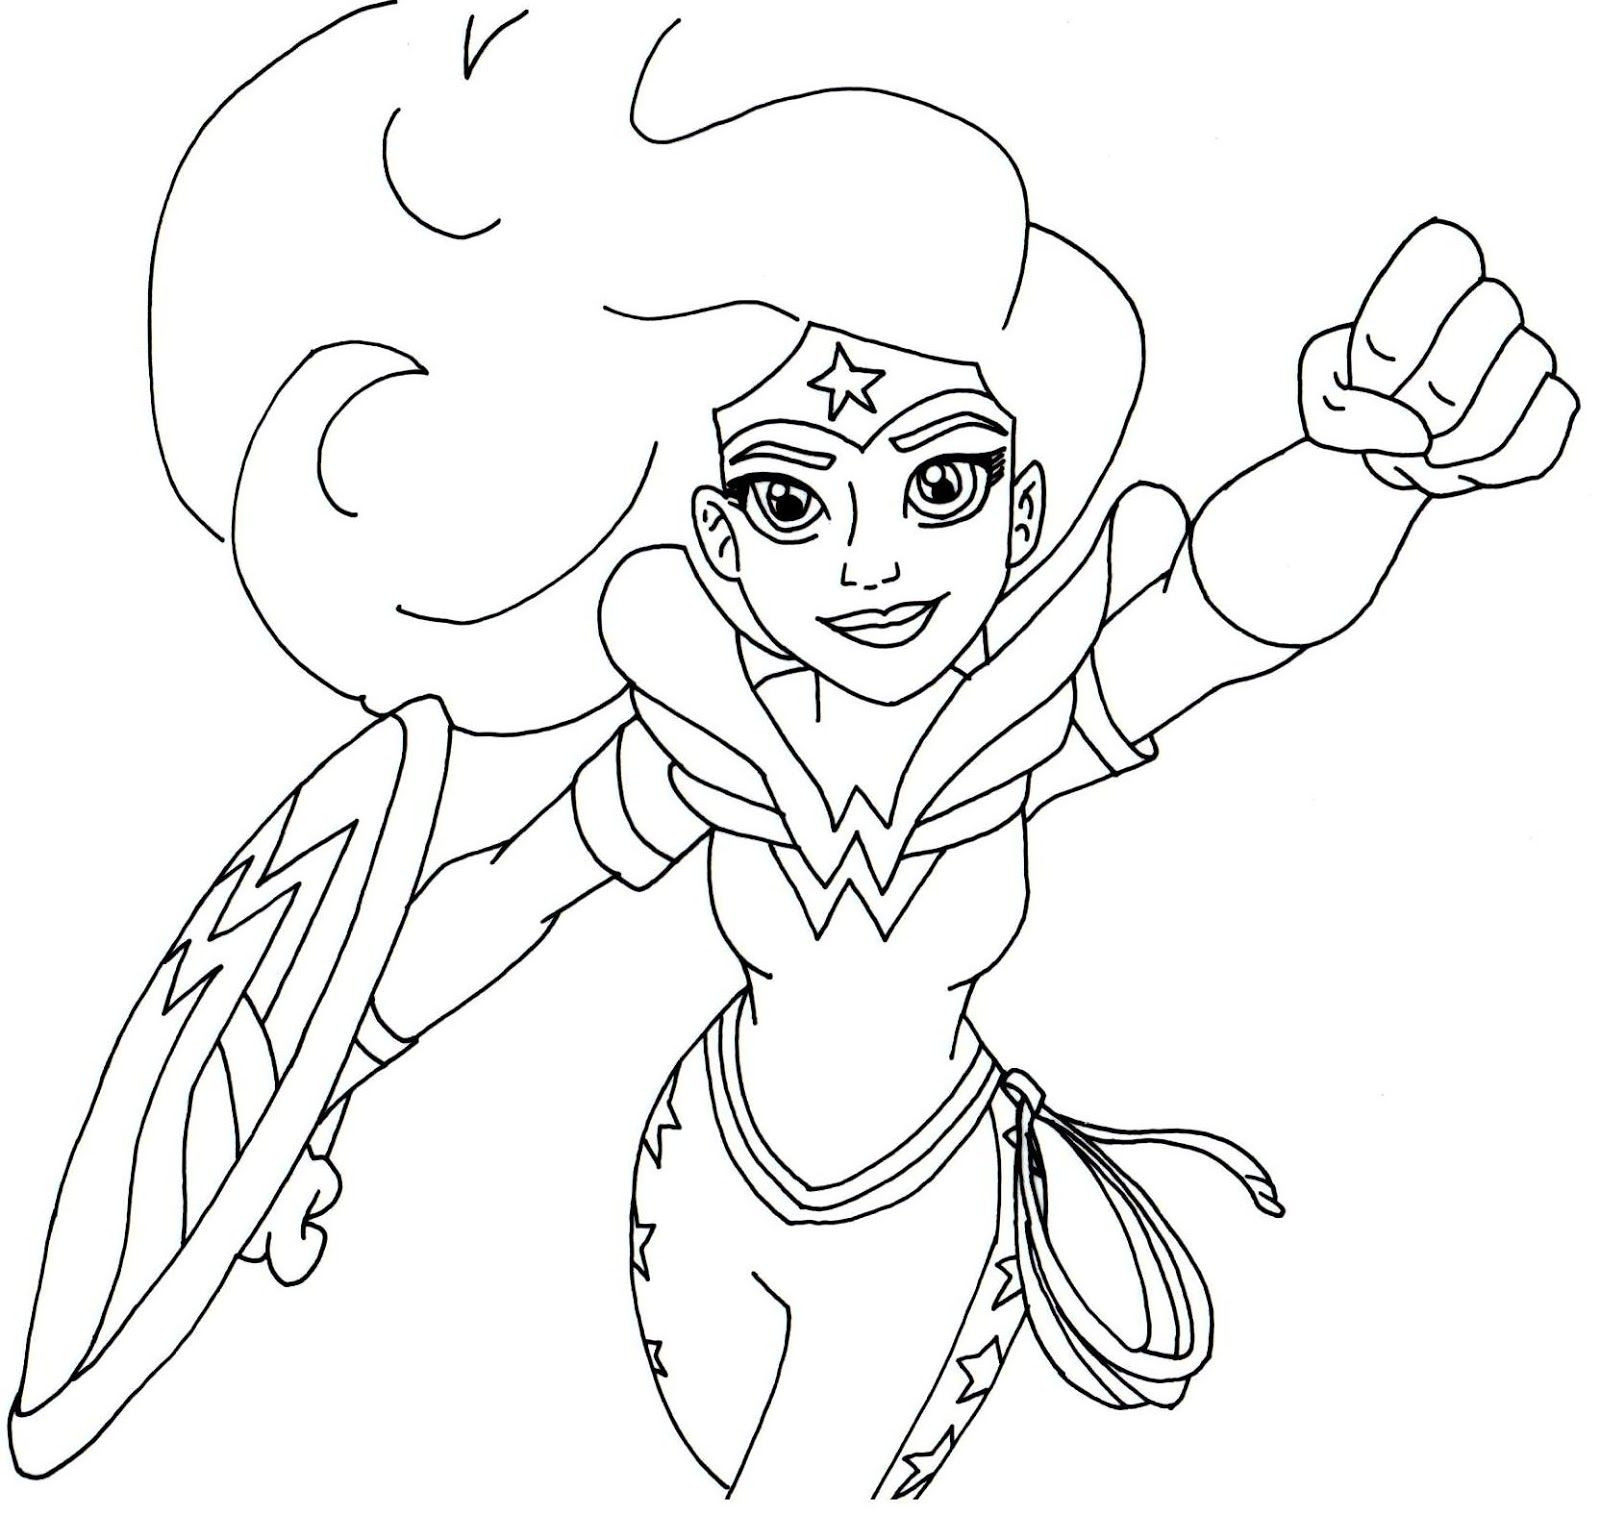 Dc Super Hero Girls Coloring Pages
 Dc Superhero Girls Coloring Pages Collection